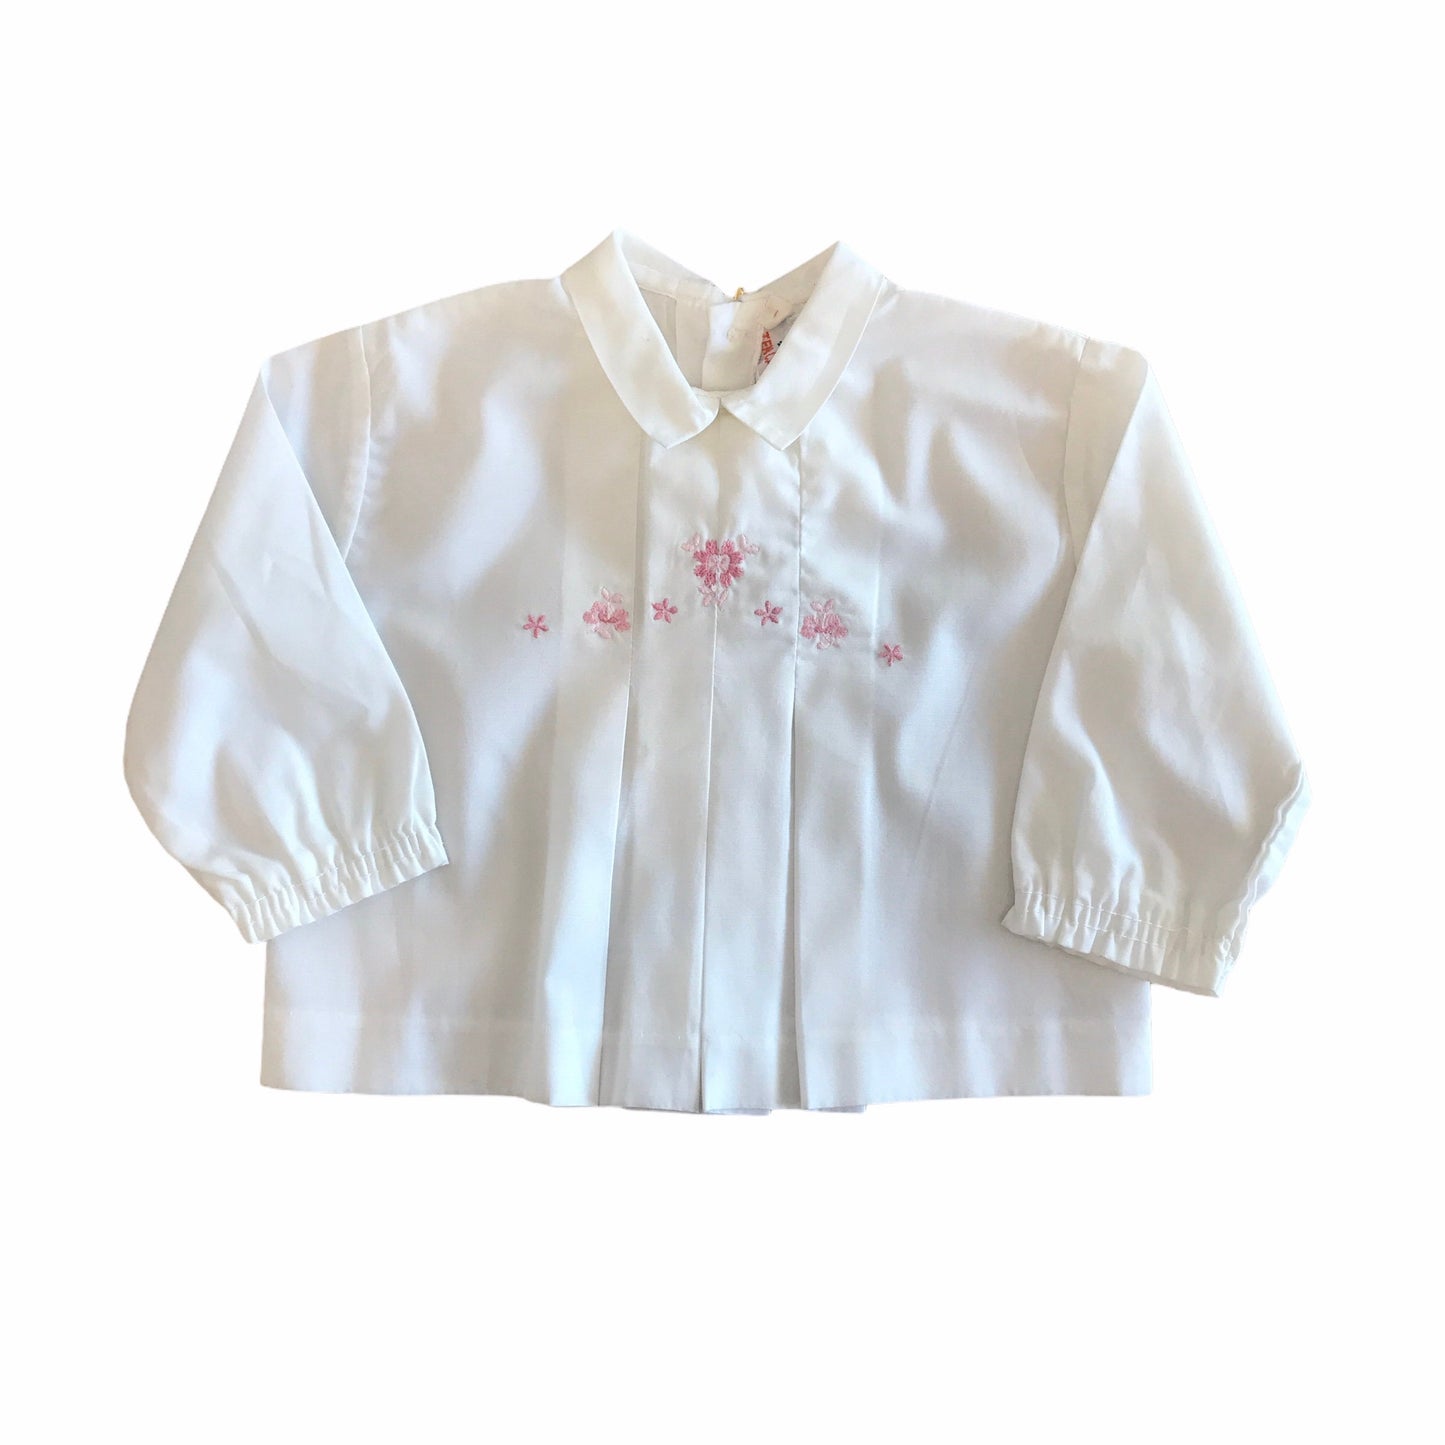 Vintage 1960s White/Pink Embroidered  Shirt British Made 3-6 Months